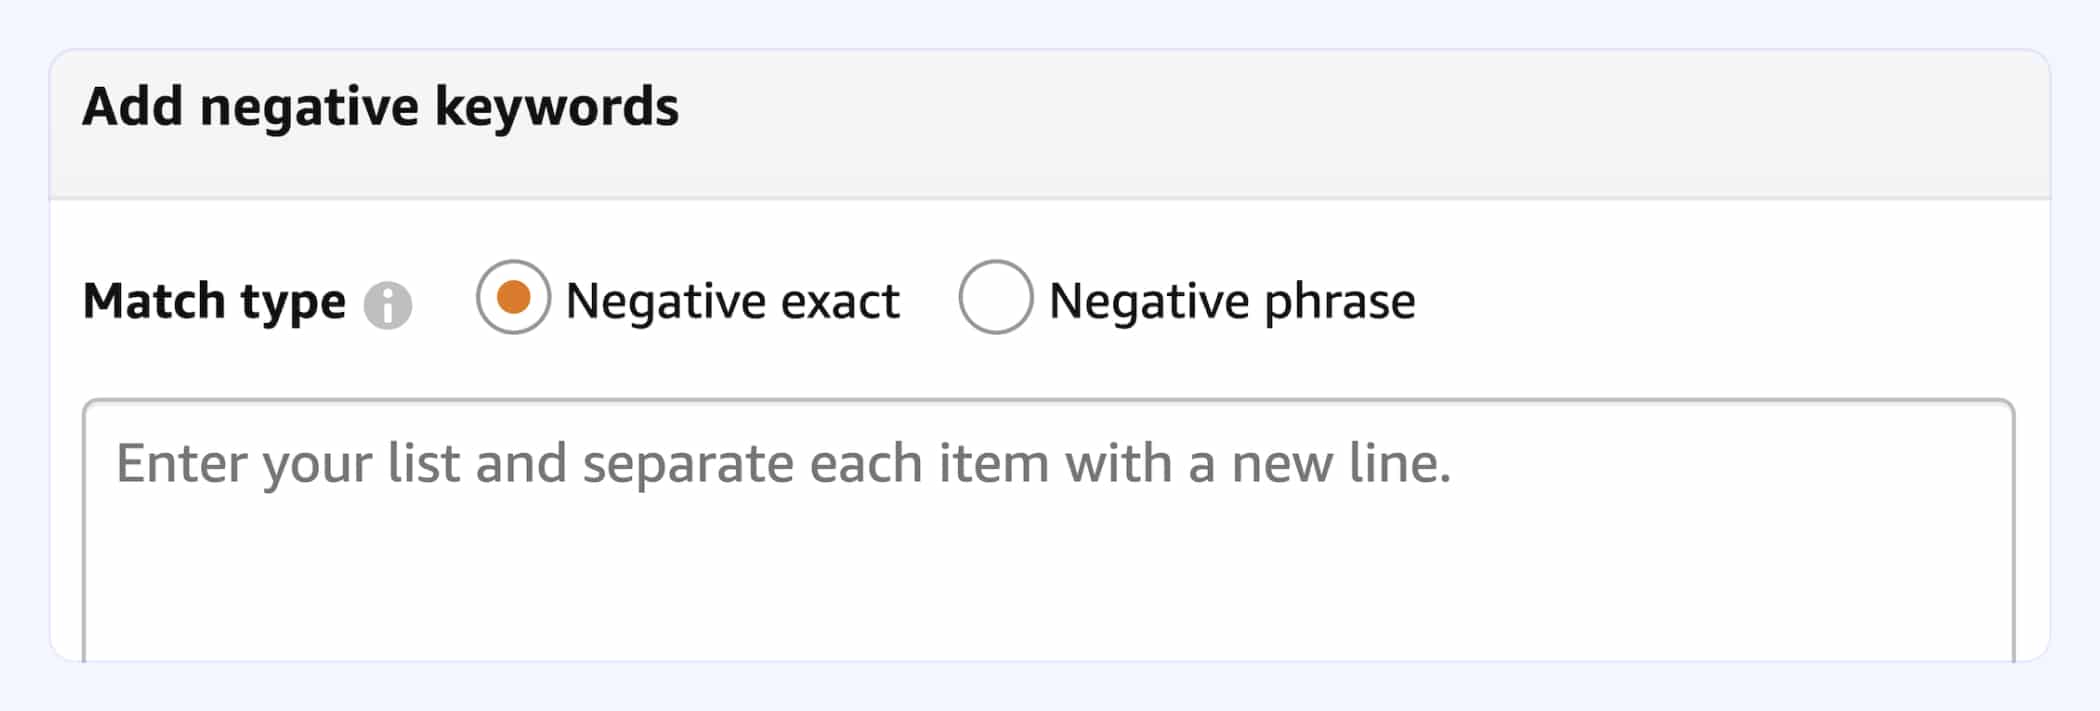 How to Add Negative Exact Keywords